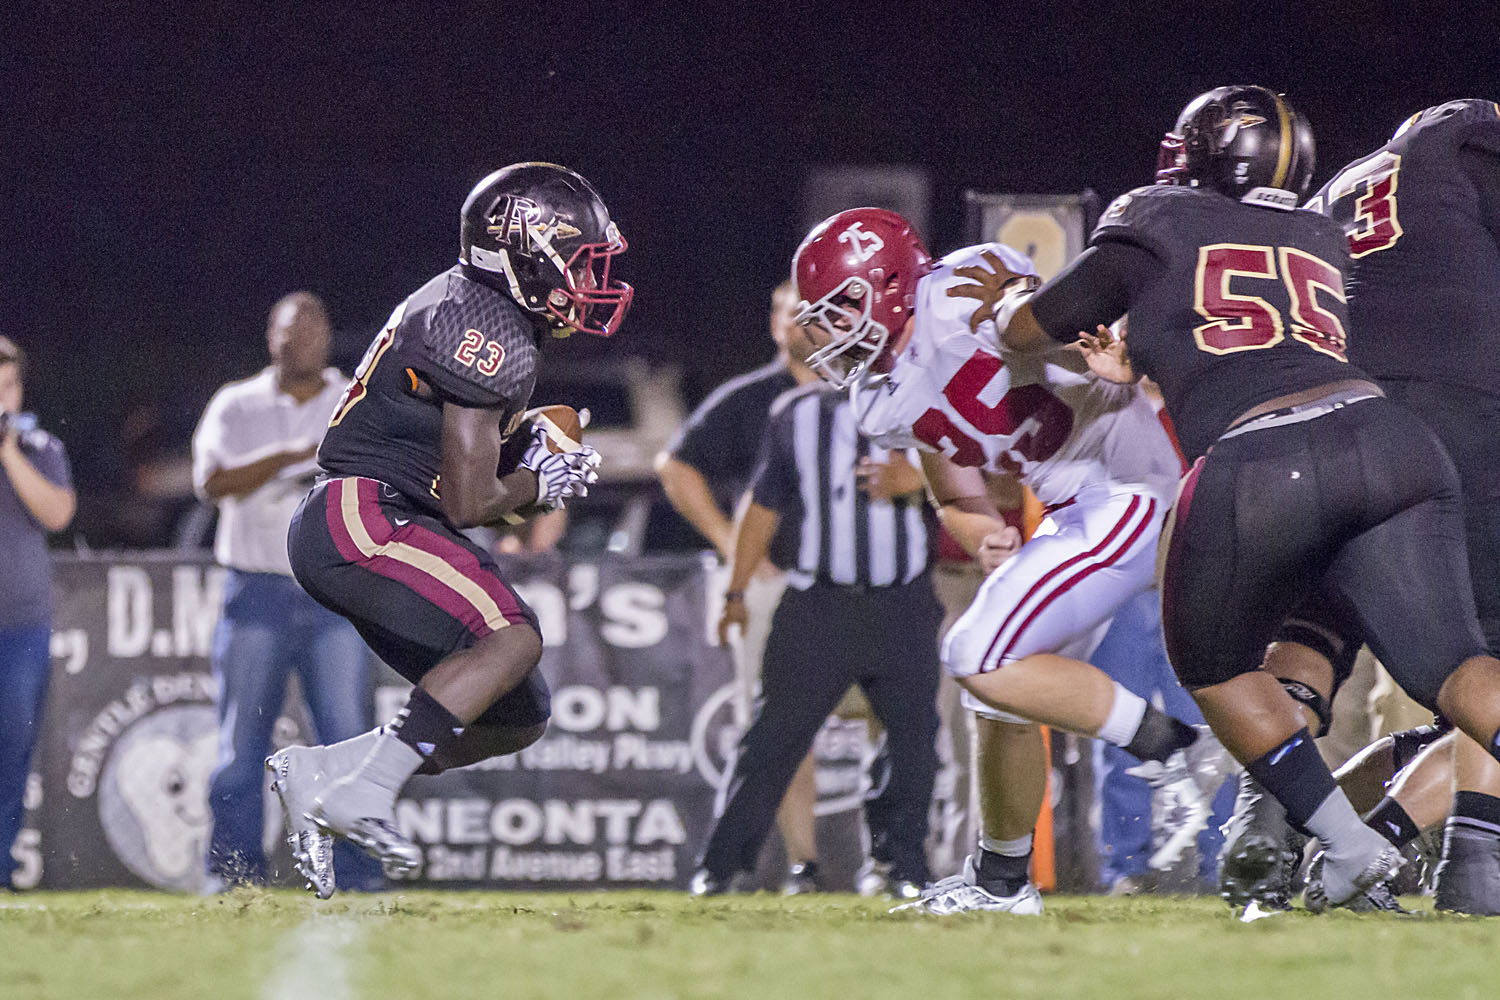 Pinson Valley hopes to win multiple playoff games